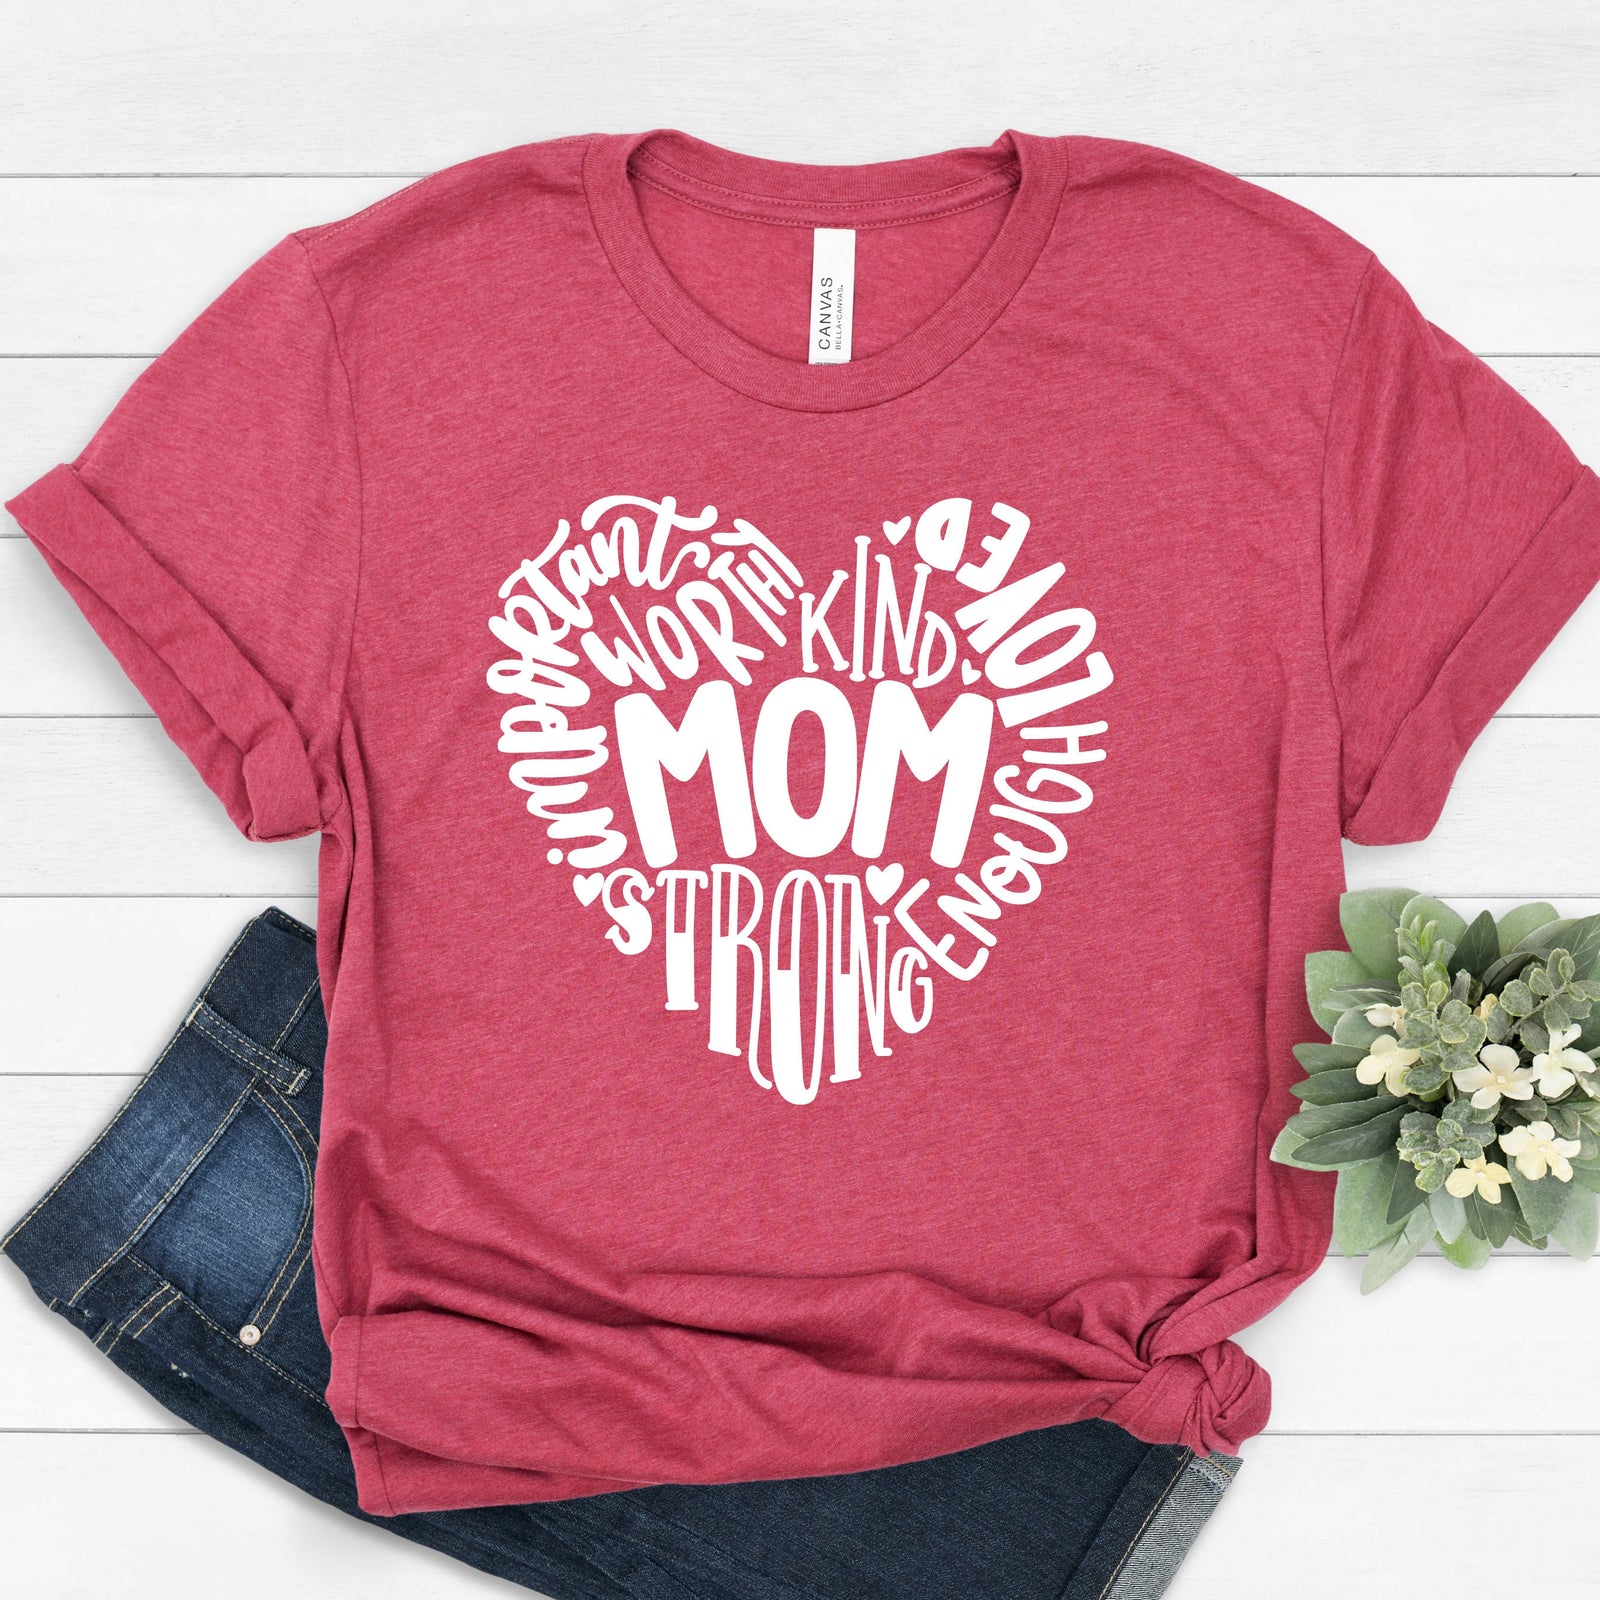 Mom Typography Heart Design Adult Unisex T Shirt -Mother's Day Gift Idea  - Mom tee